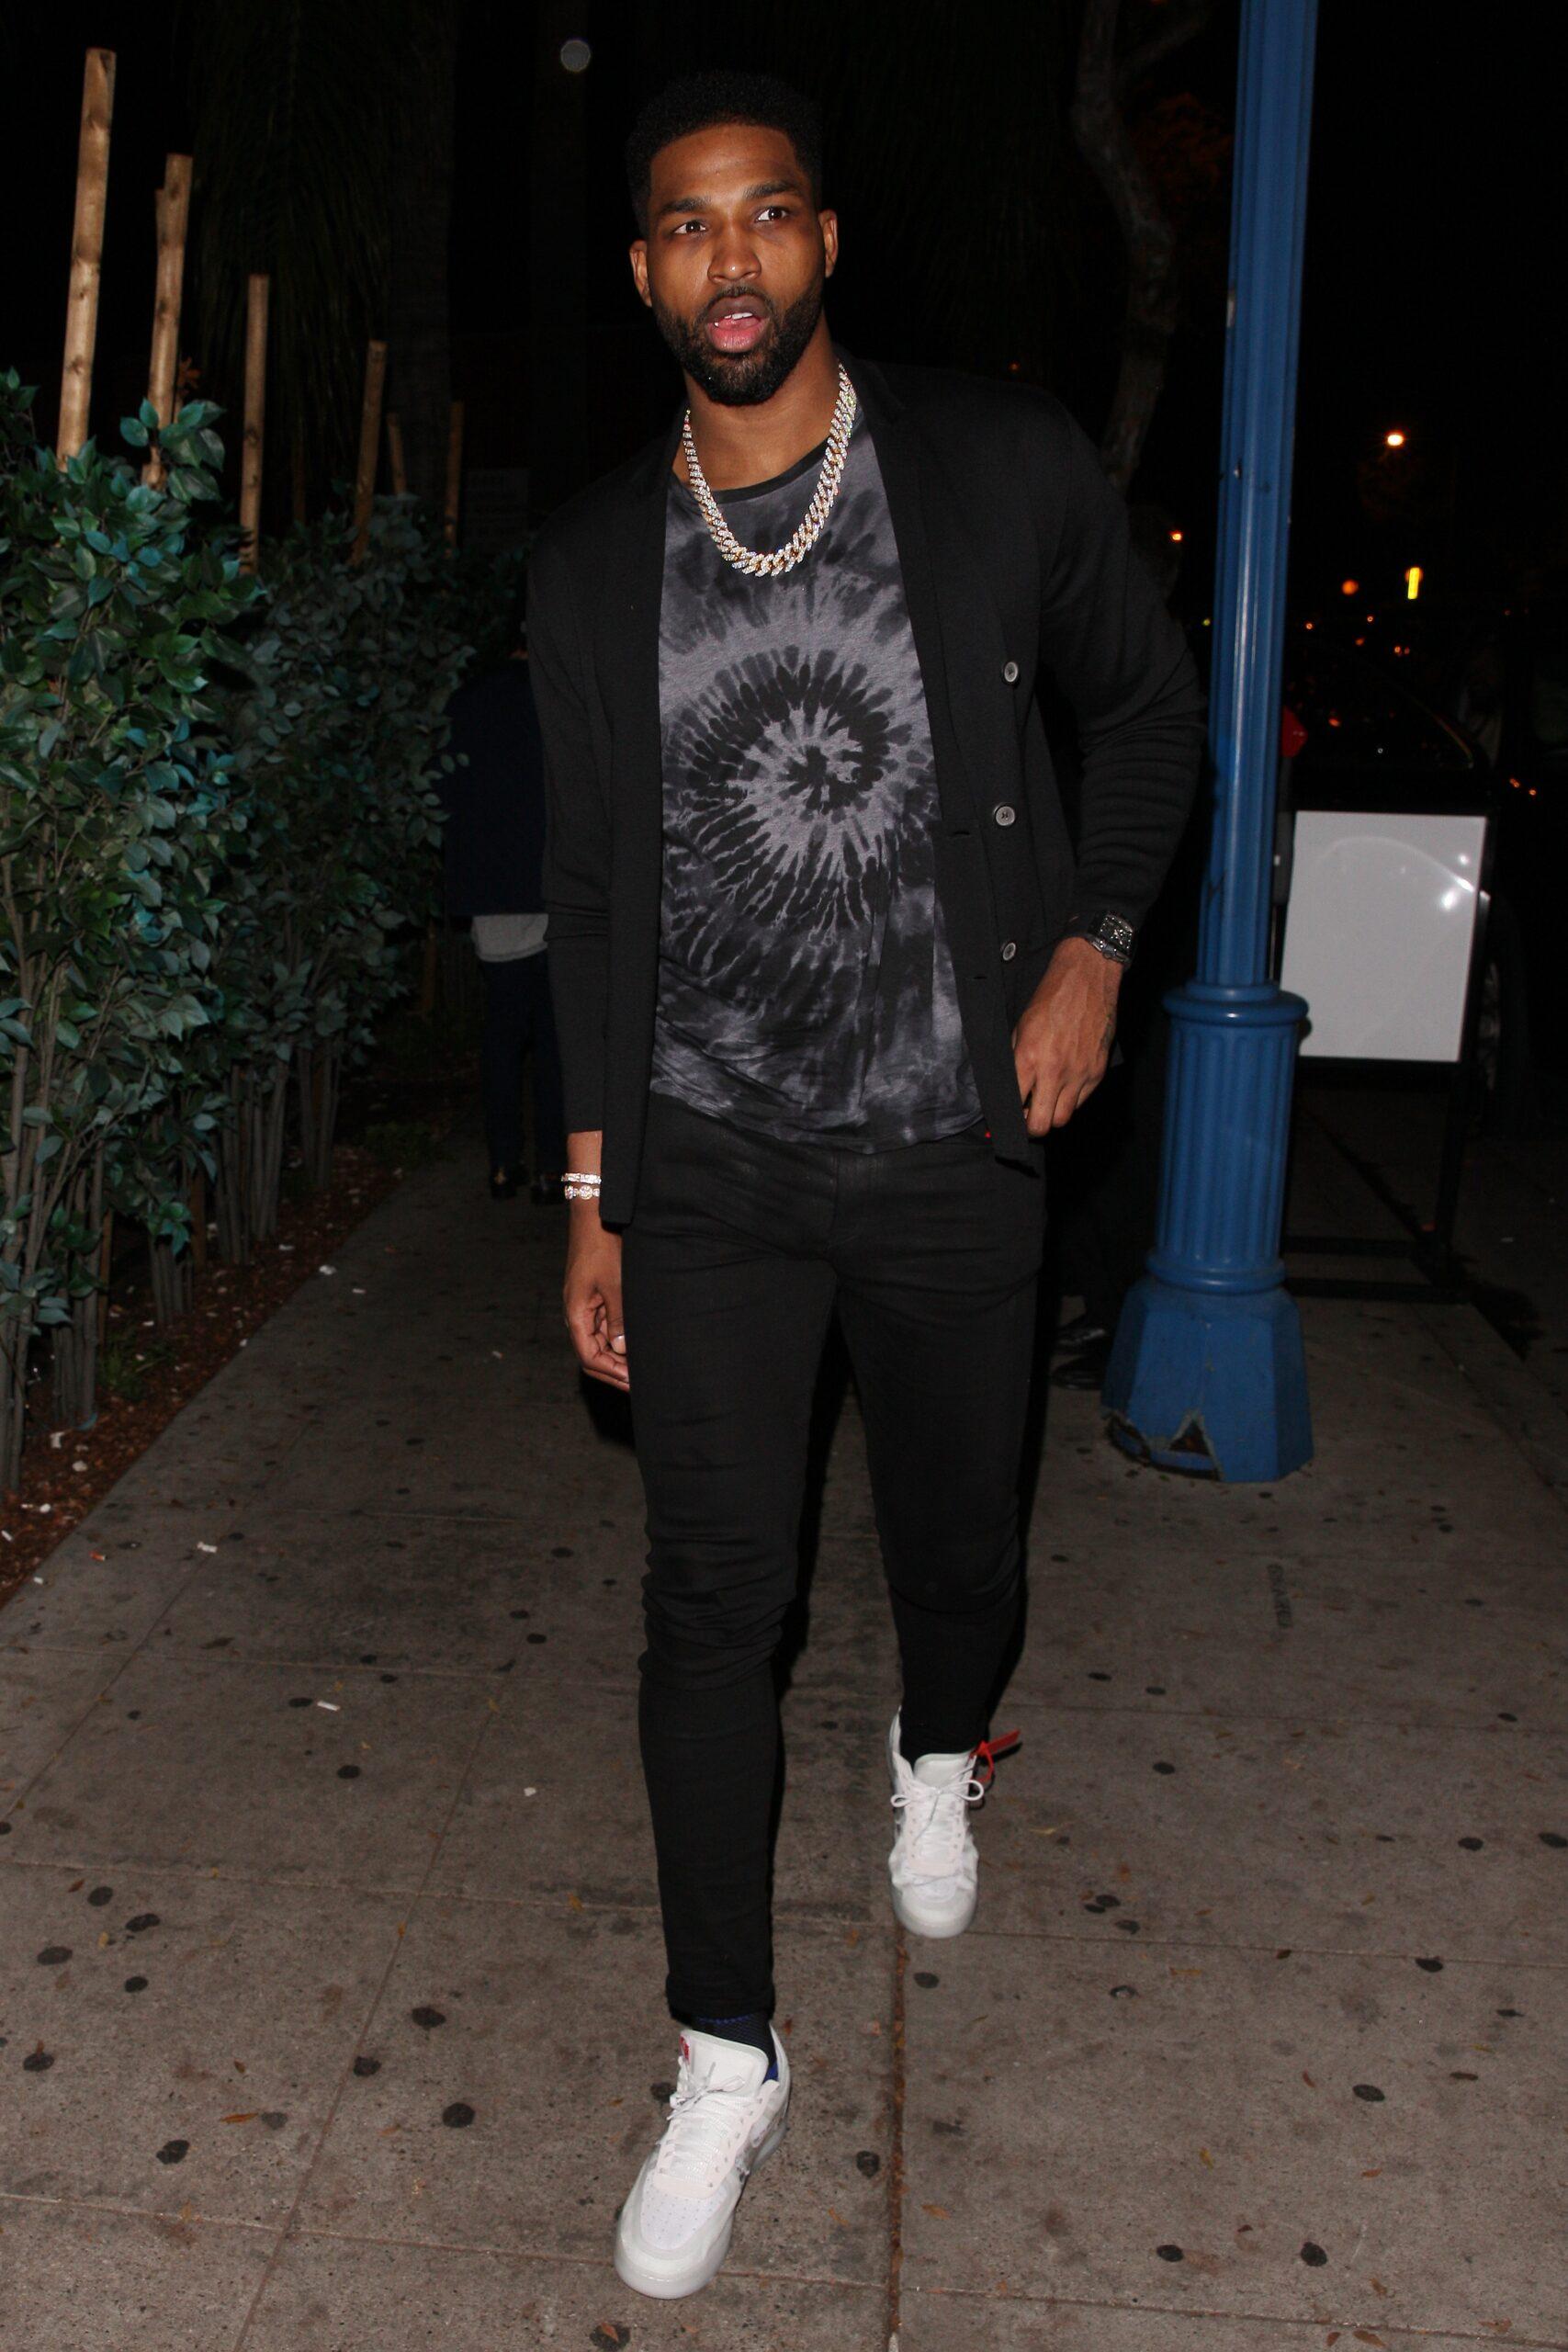 Basketball player Tristan Thompson leaves the Delilah Restaurant by himself